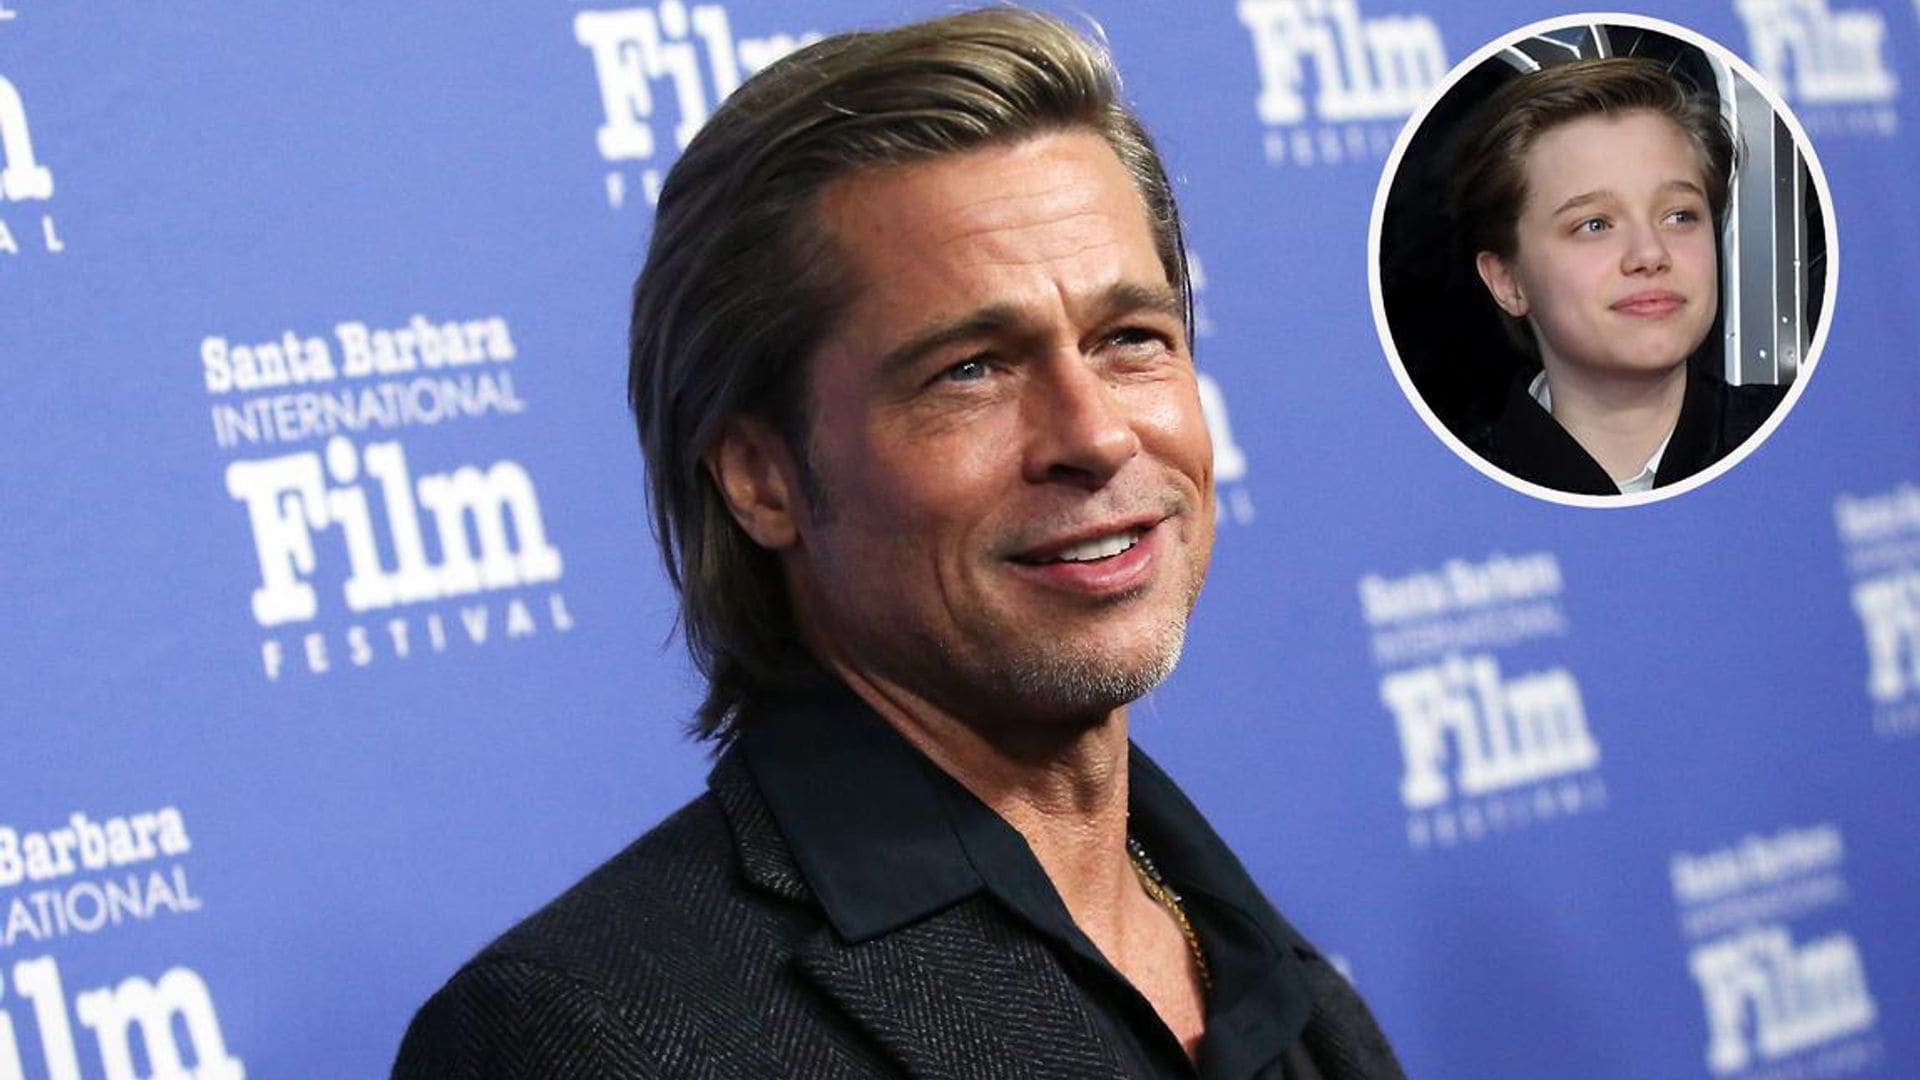 Brad Pitt is ‘so proud’ of daughter Shiloh on her 14th birthday